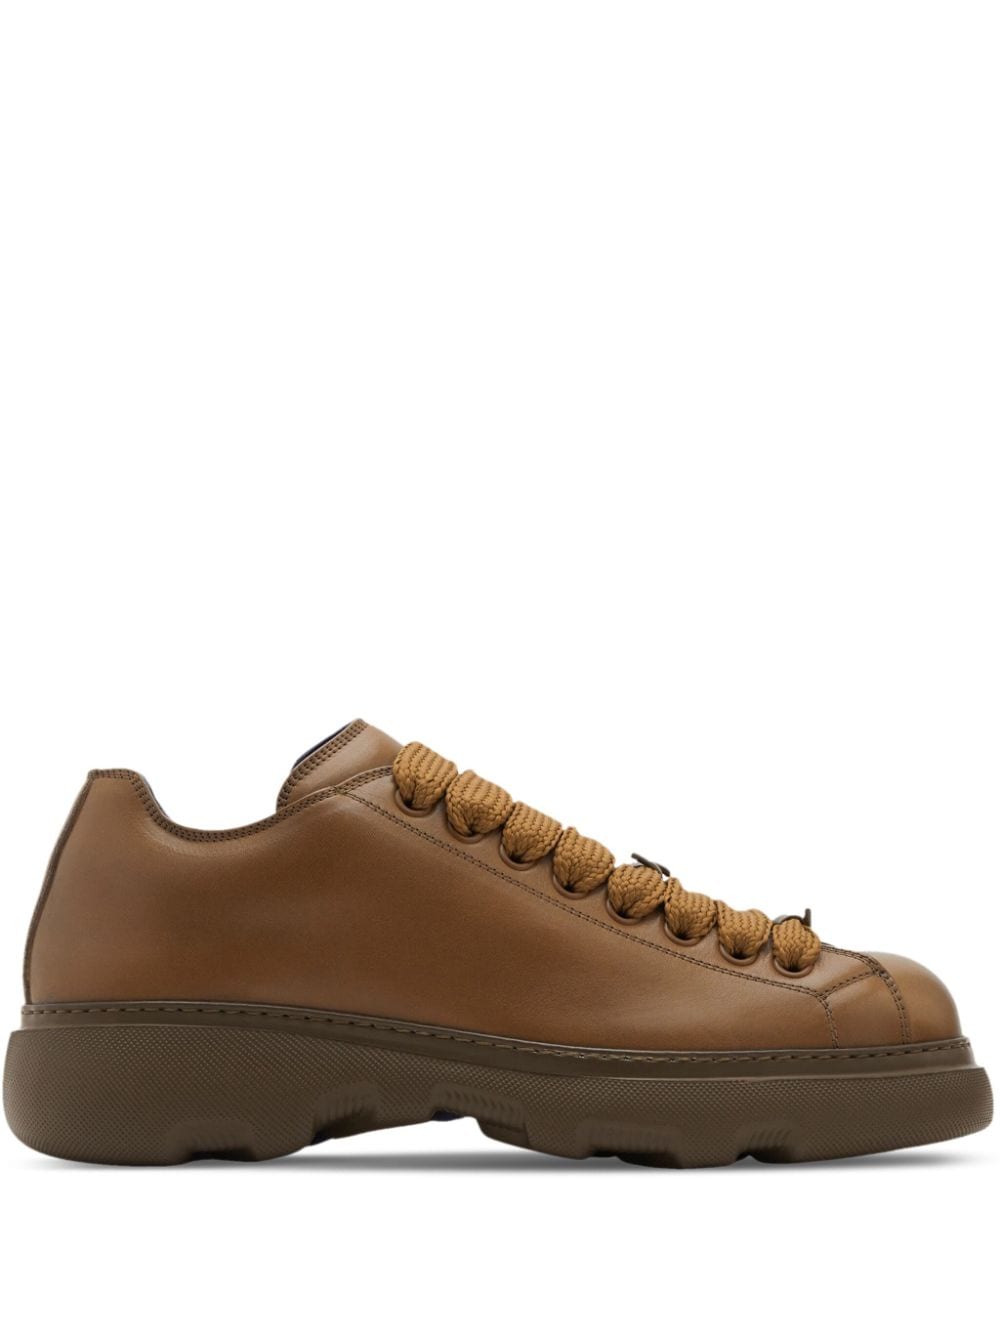 Ranger leather sneakers